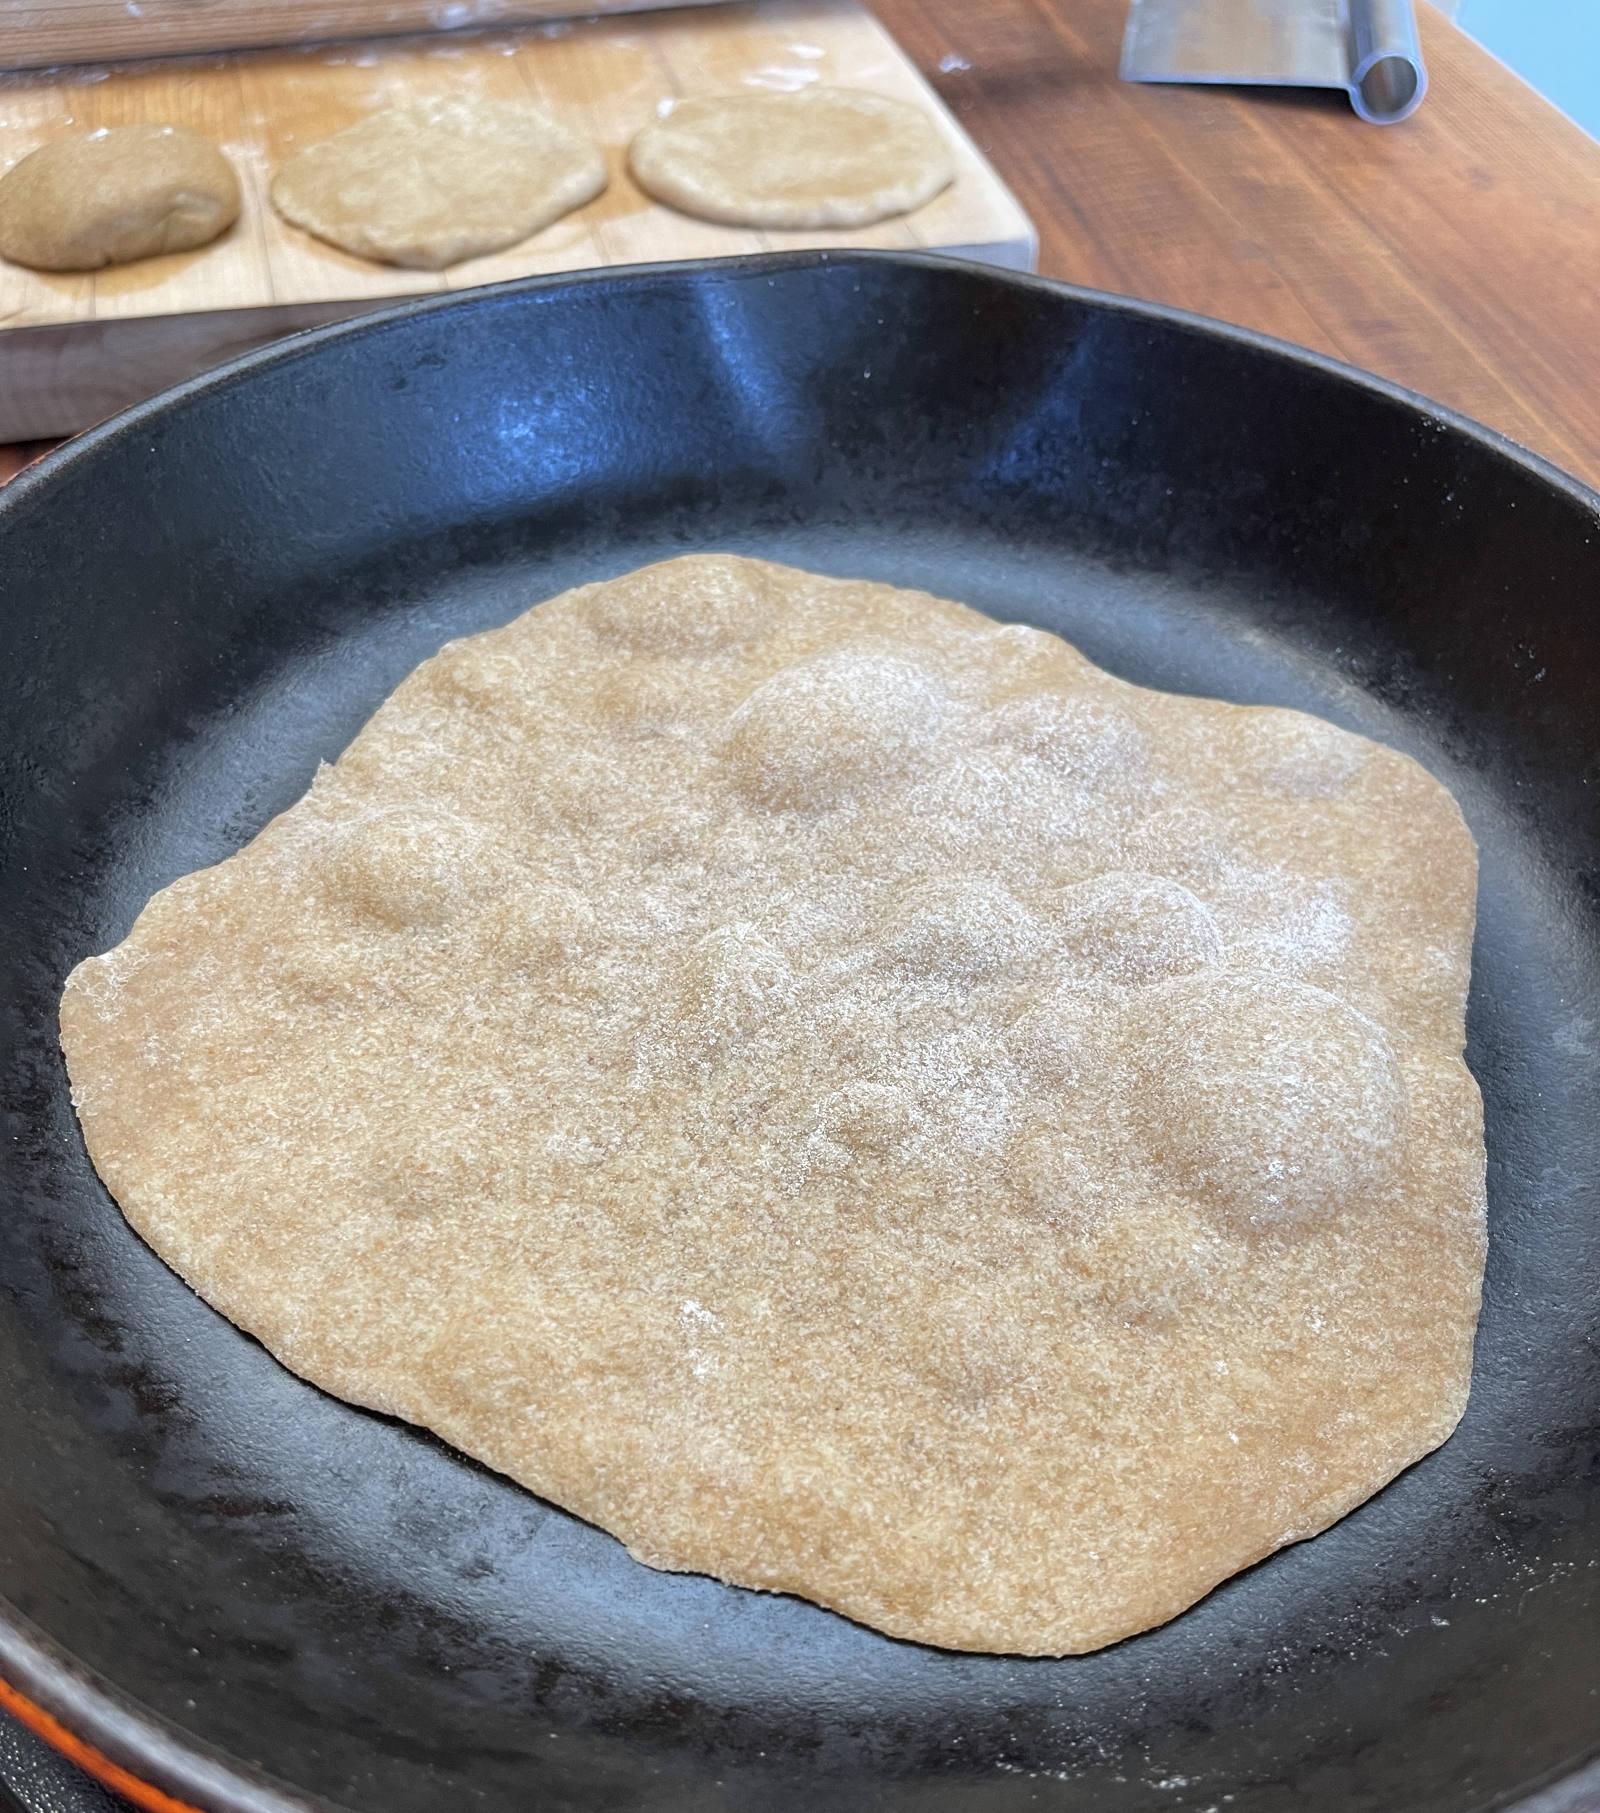 Bubbles form on the surface of a wheat tortilla cooking in an enameled cast iron pan. More tortillas sit in the background, ready to roll out and cook.